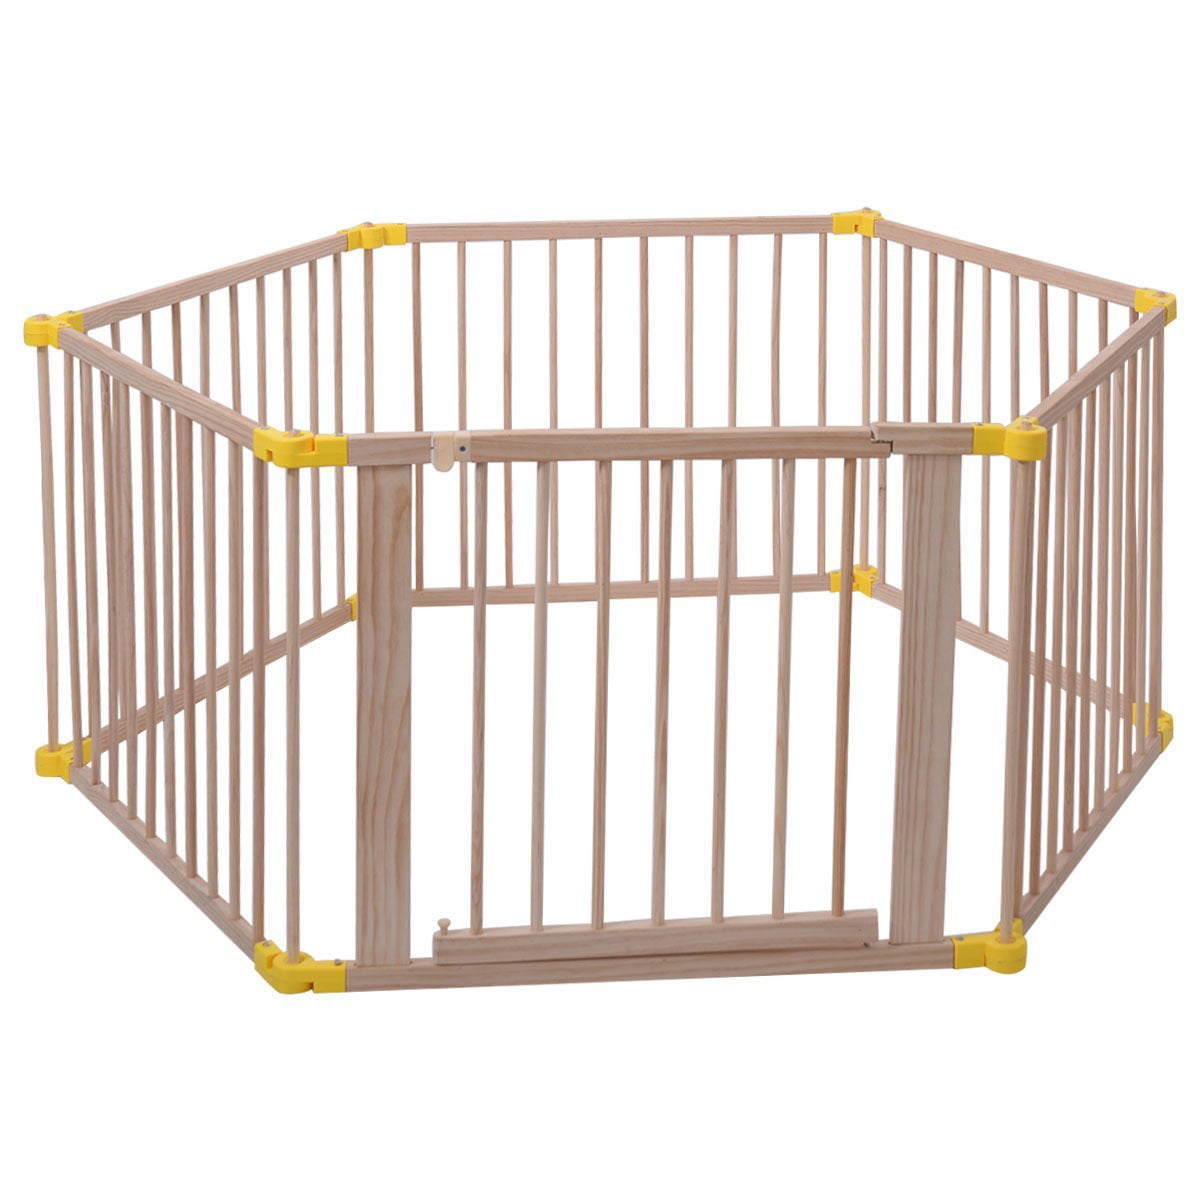 Details about   Wooden Baby Playpen Fence 6 Sides Foldable Room Divider Activity Cetre Play Yard 